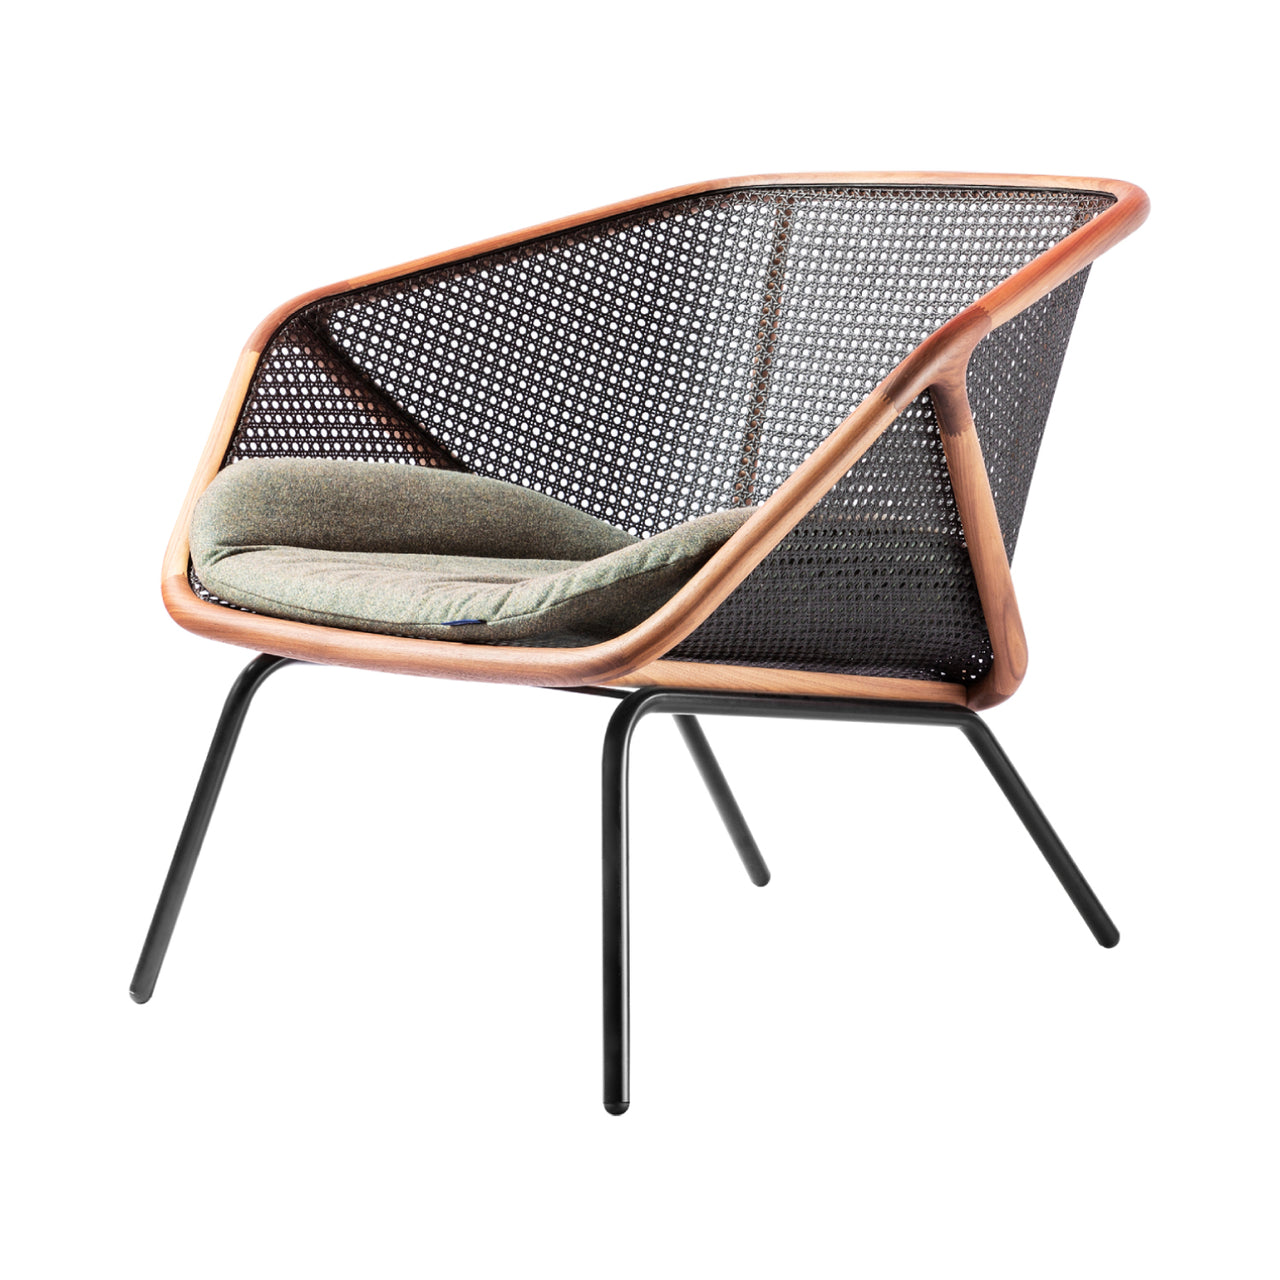 Colony Armchair: Seat Cushion + Beech + Black Vienna Straw + Lacquered Black